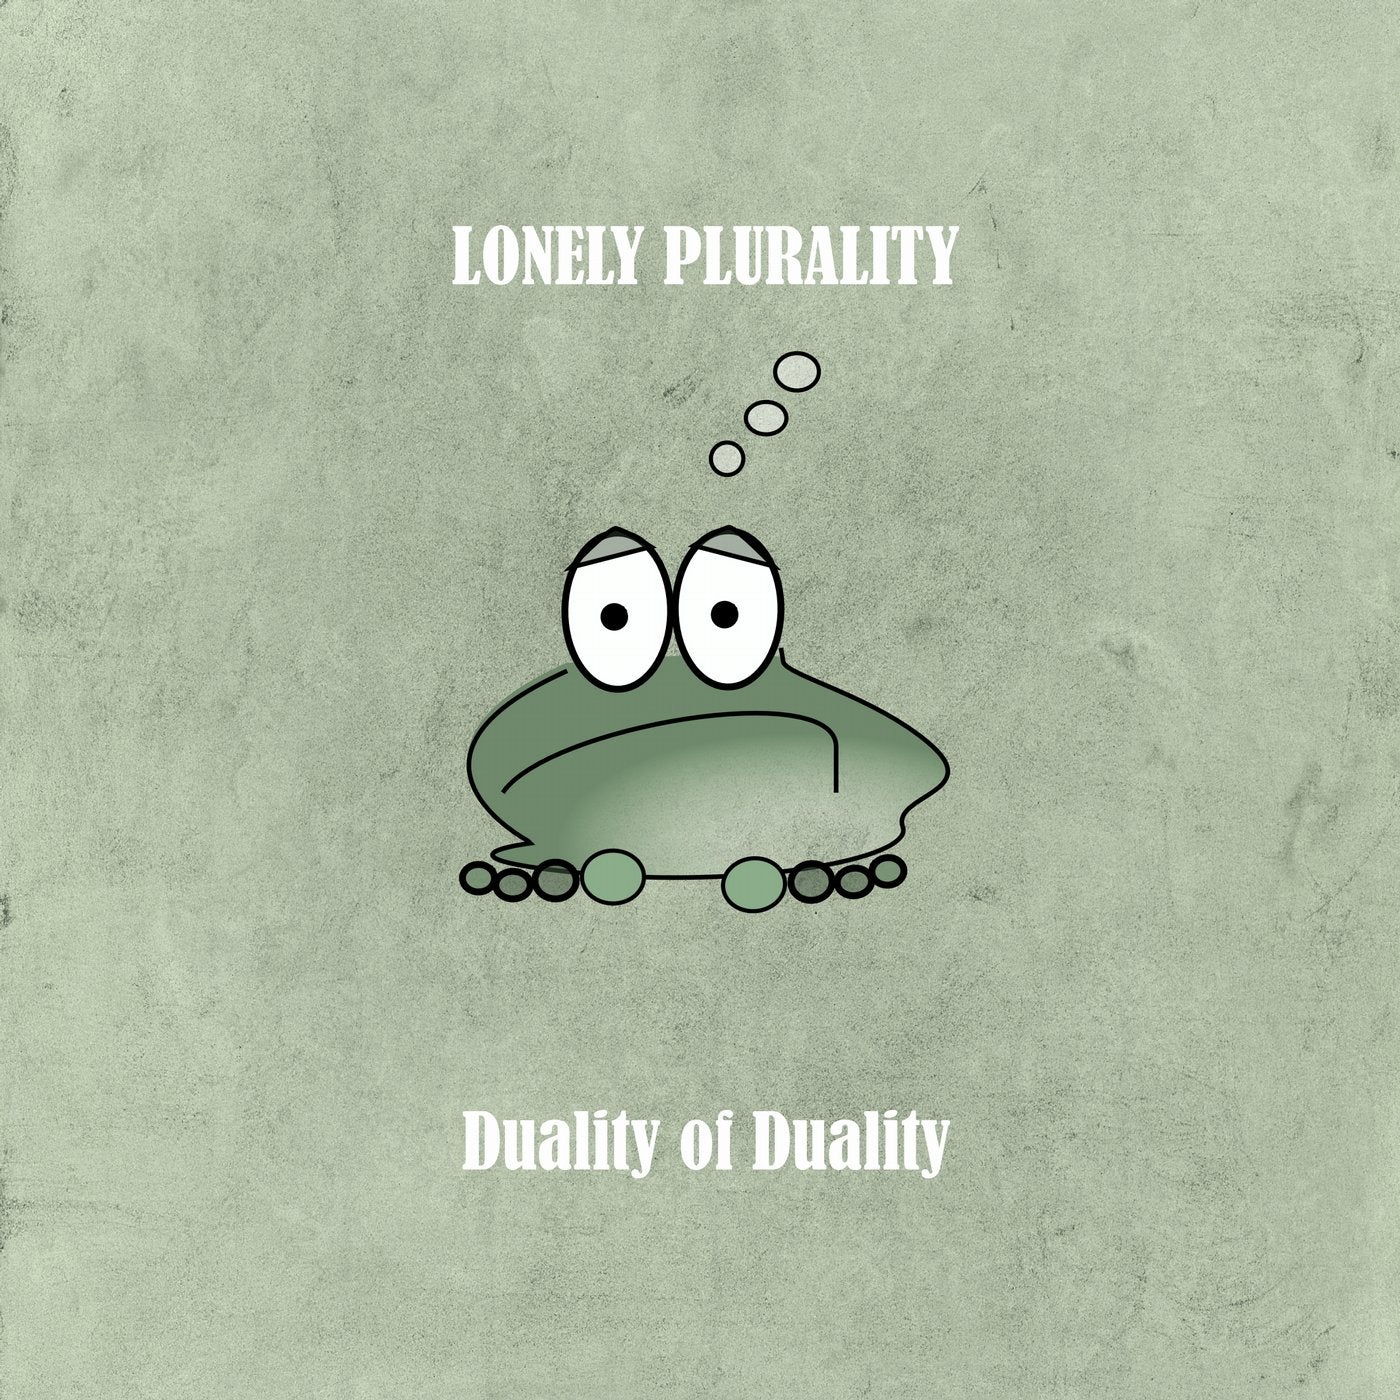 Lonely Plurality